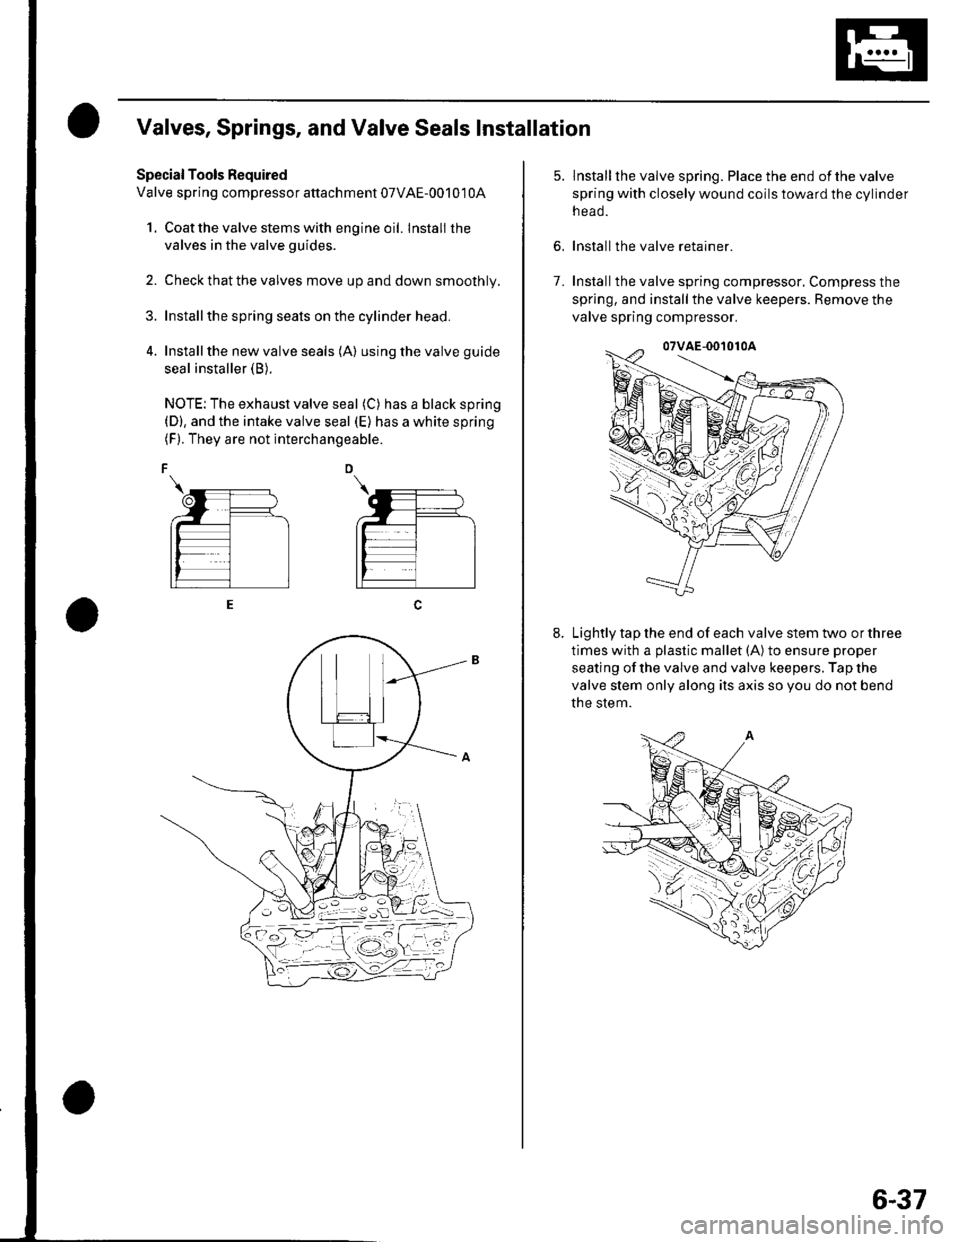 HONDA CIVIC 2003 7.G Service Manual Valves, Springs, and Valve Seals Installation
Special Tools Required
Valve spring compressor attachment 07VAE-00101 0A
1. Coat the valve stems with engine oil. lnstall the
valves in the valve guides.
